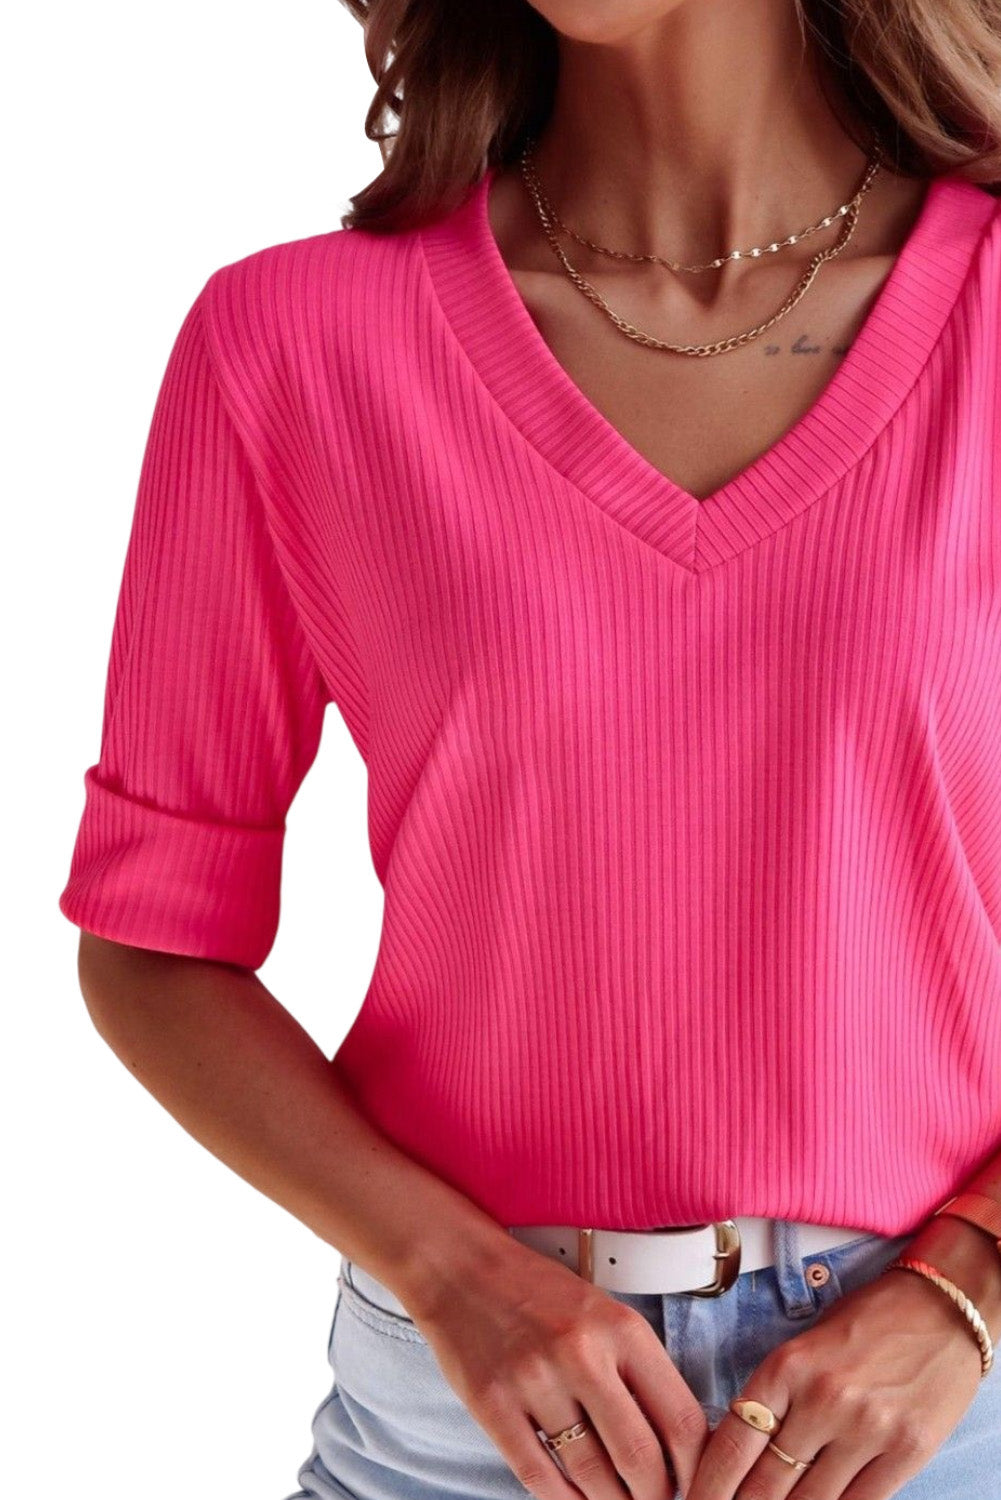 Rose Solid Color Ribbed Knit V Neck Casual Top for Women